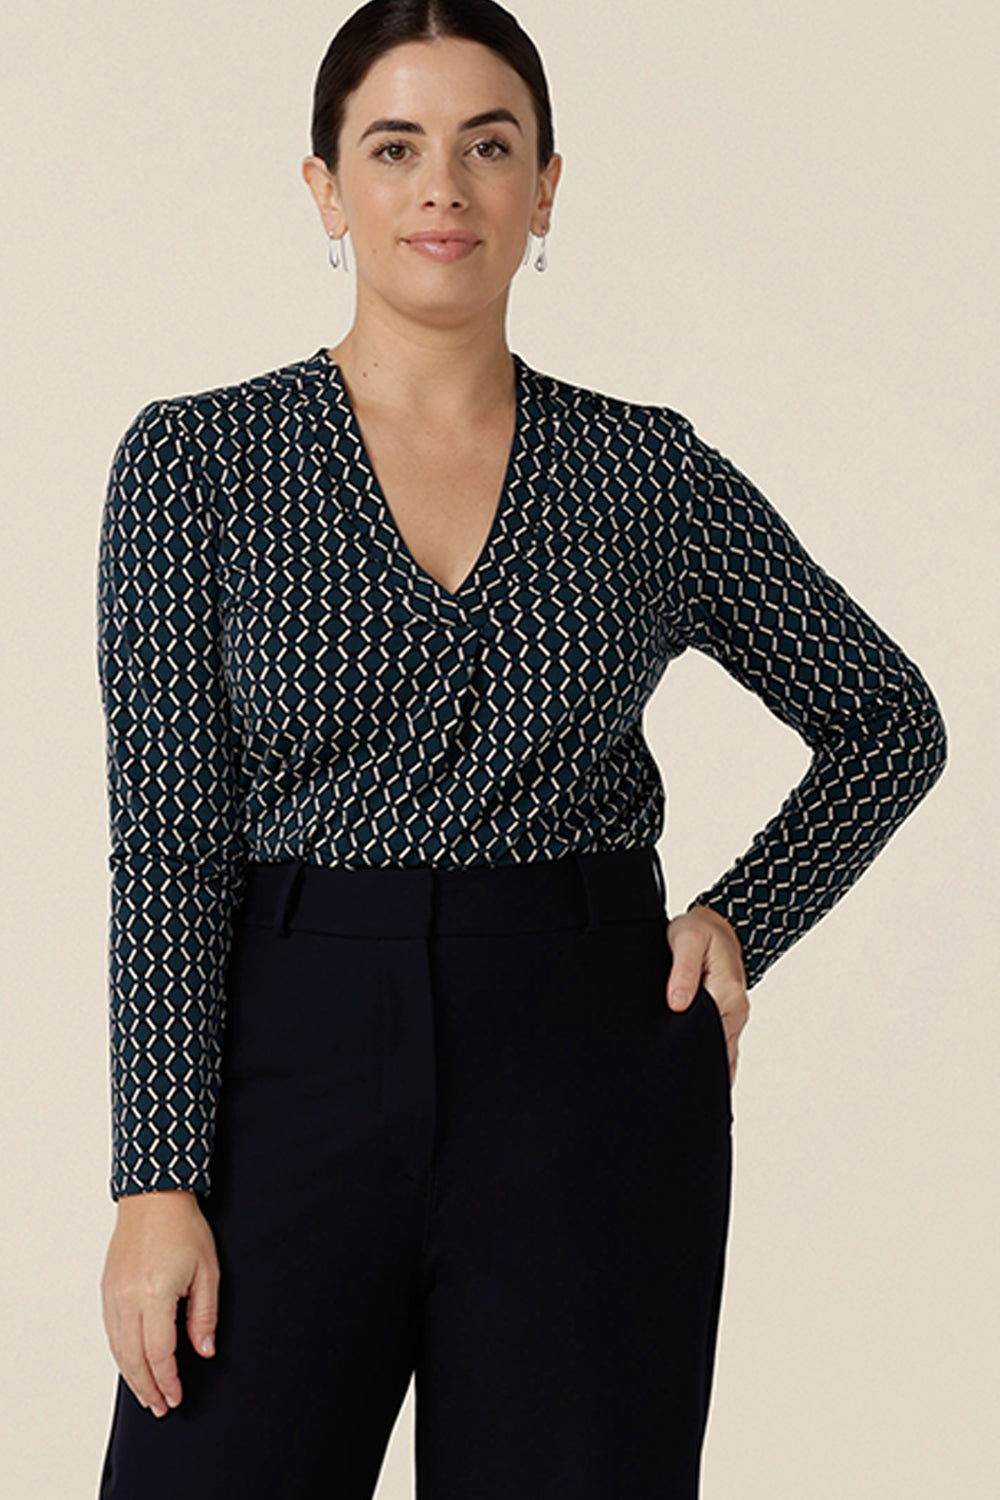 A good work wear top with long sleeves, the Dakota Top is a V neck top in blue and white Infinity print jersey. Made in Australia by Australian and New Zealand women's clothes brand, L&F, shop this smart top in sizes 8 to 24.